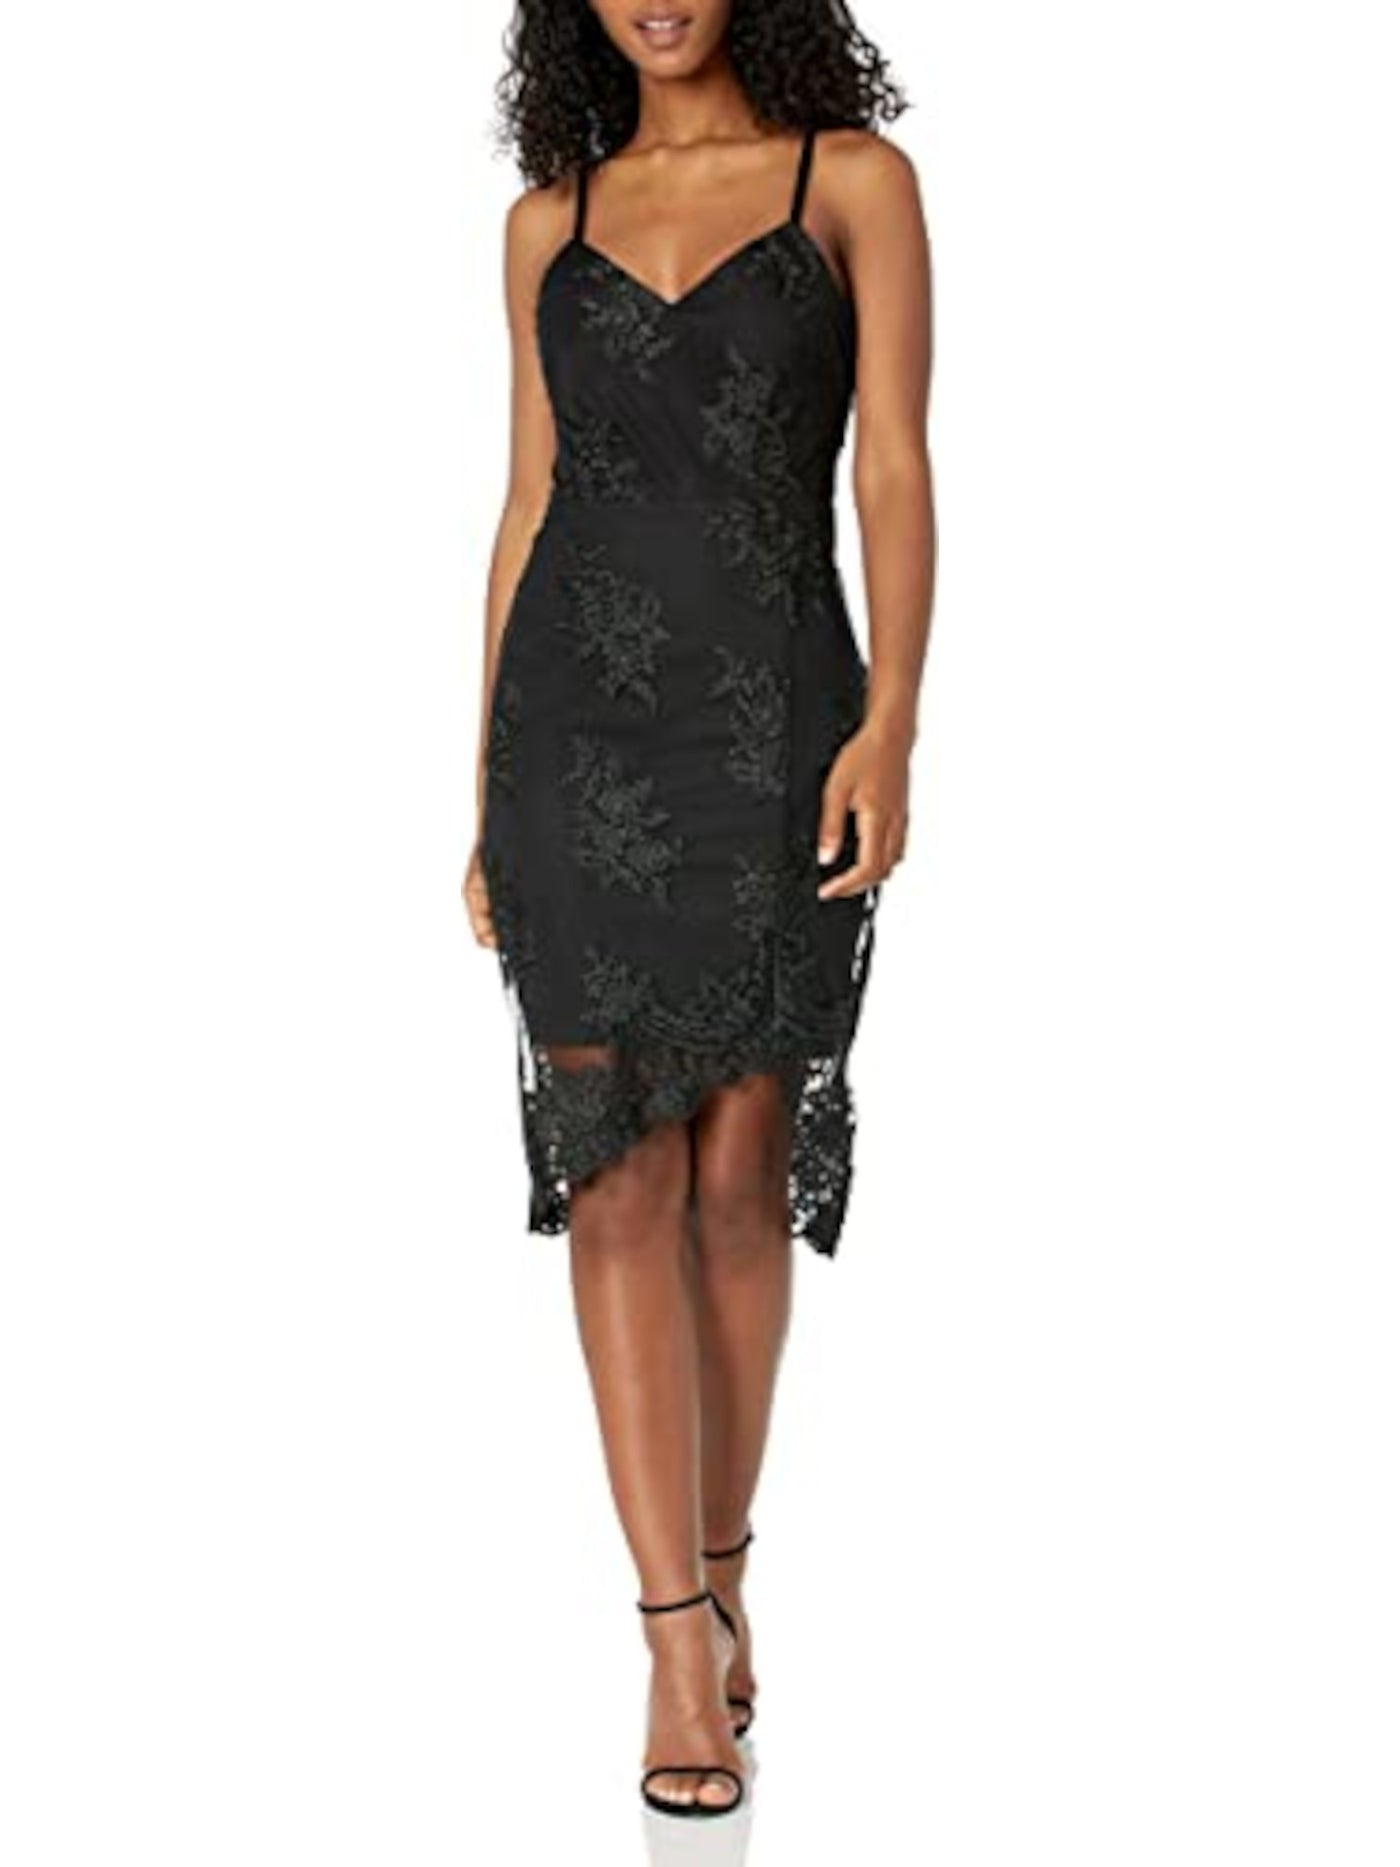 GUESS Womens Black Embroidered Lace Asymmetrical Spaghetti Strap V Neck Below The Knee Cocktail Sheath Dress 0